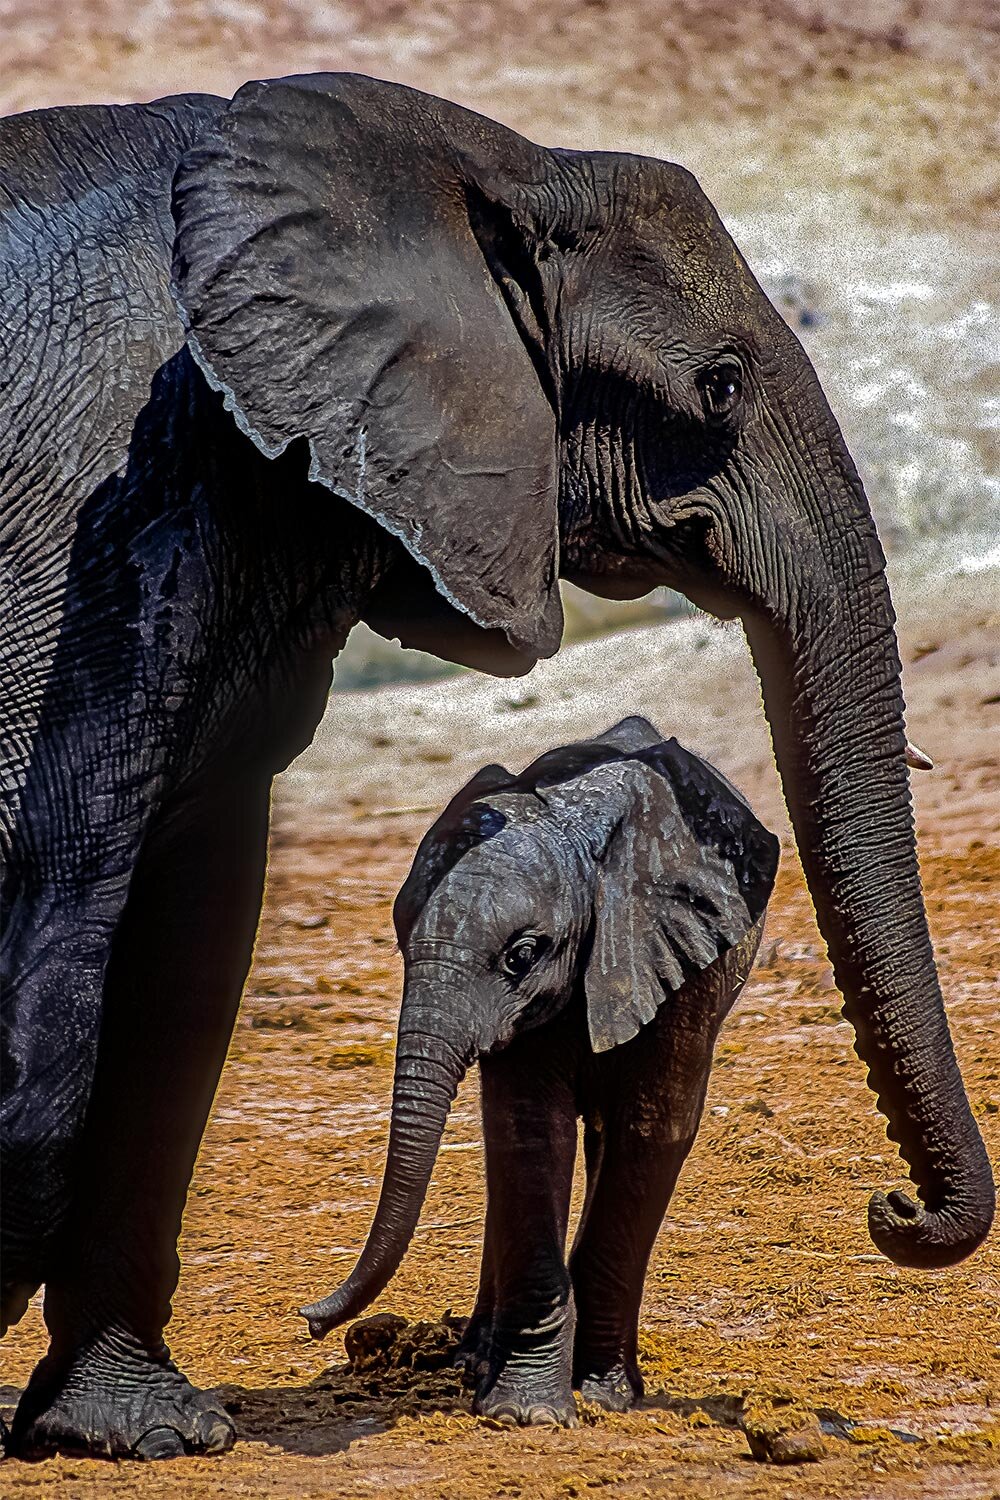 Mother & Baby